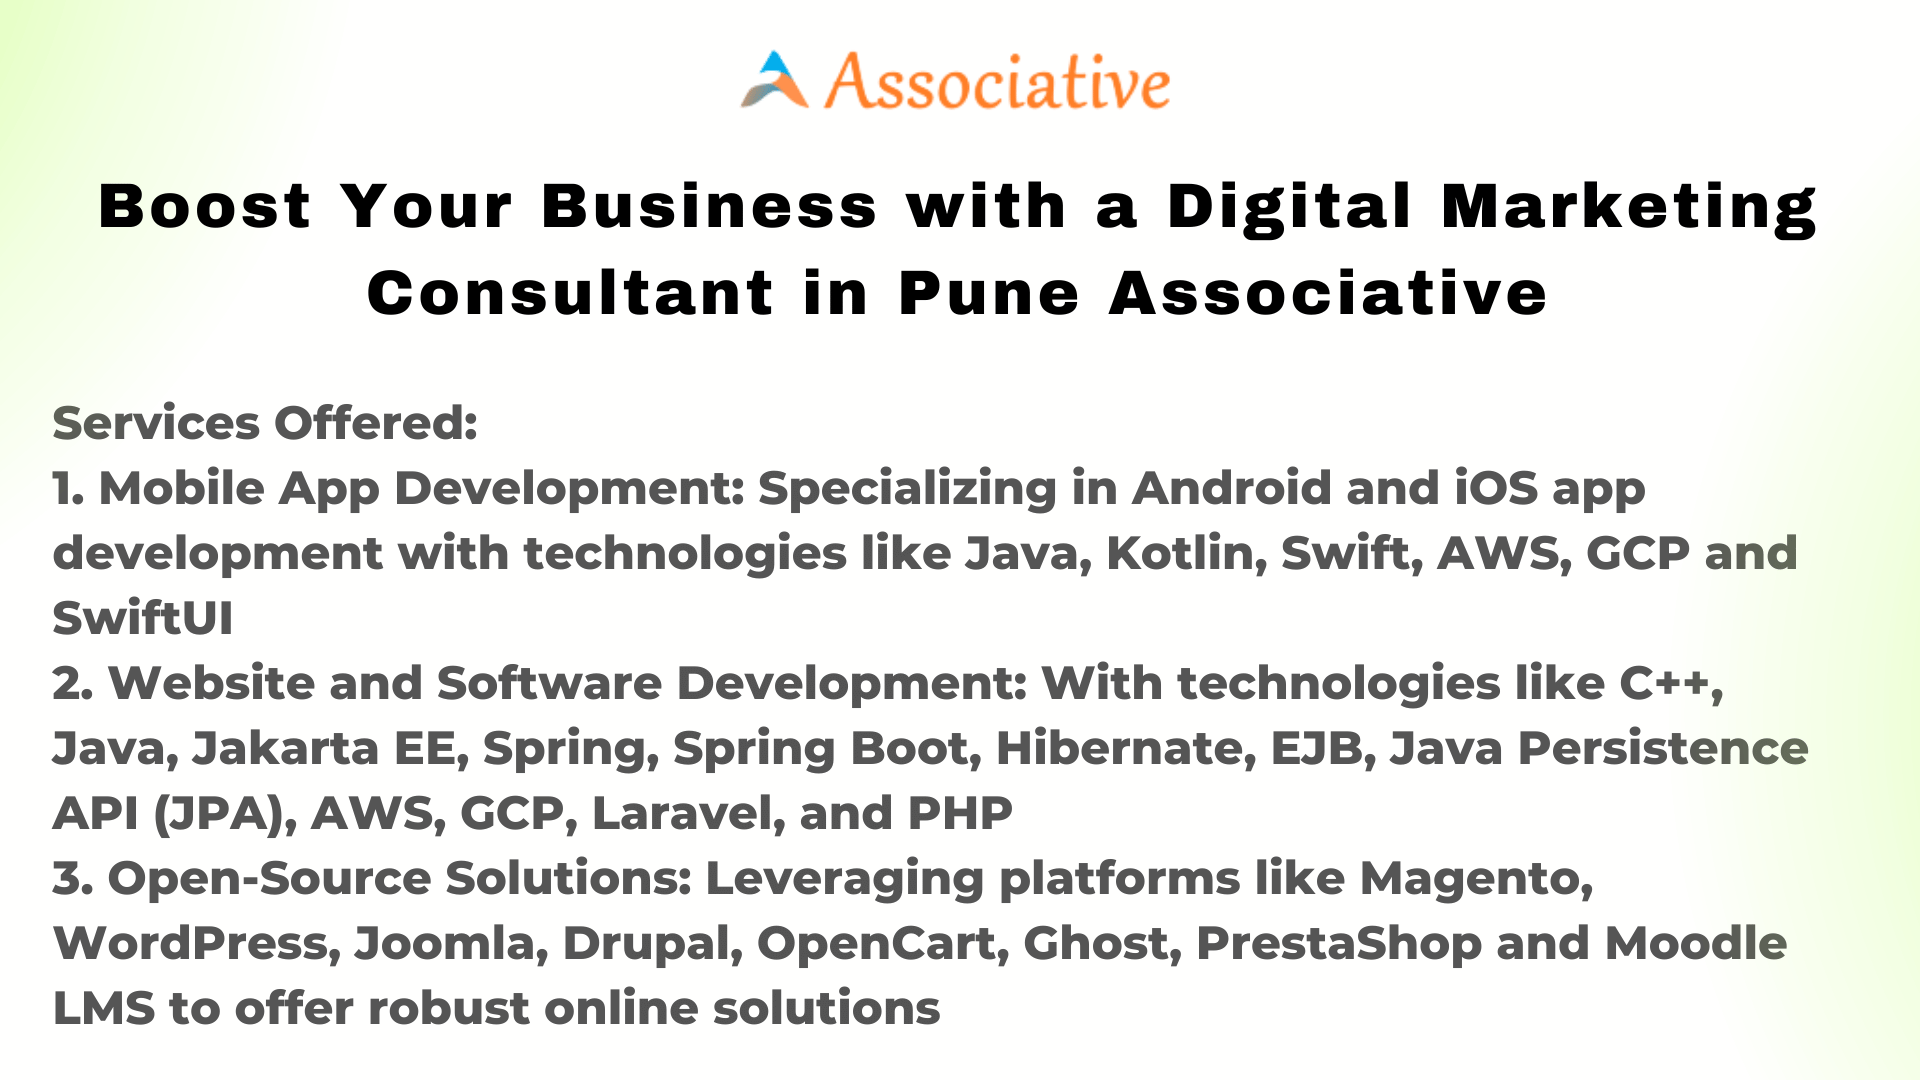 Boost Your Business with a Digital Marketing Consultant in Pune Associative